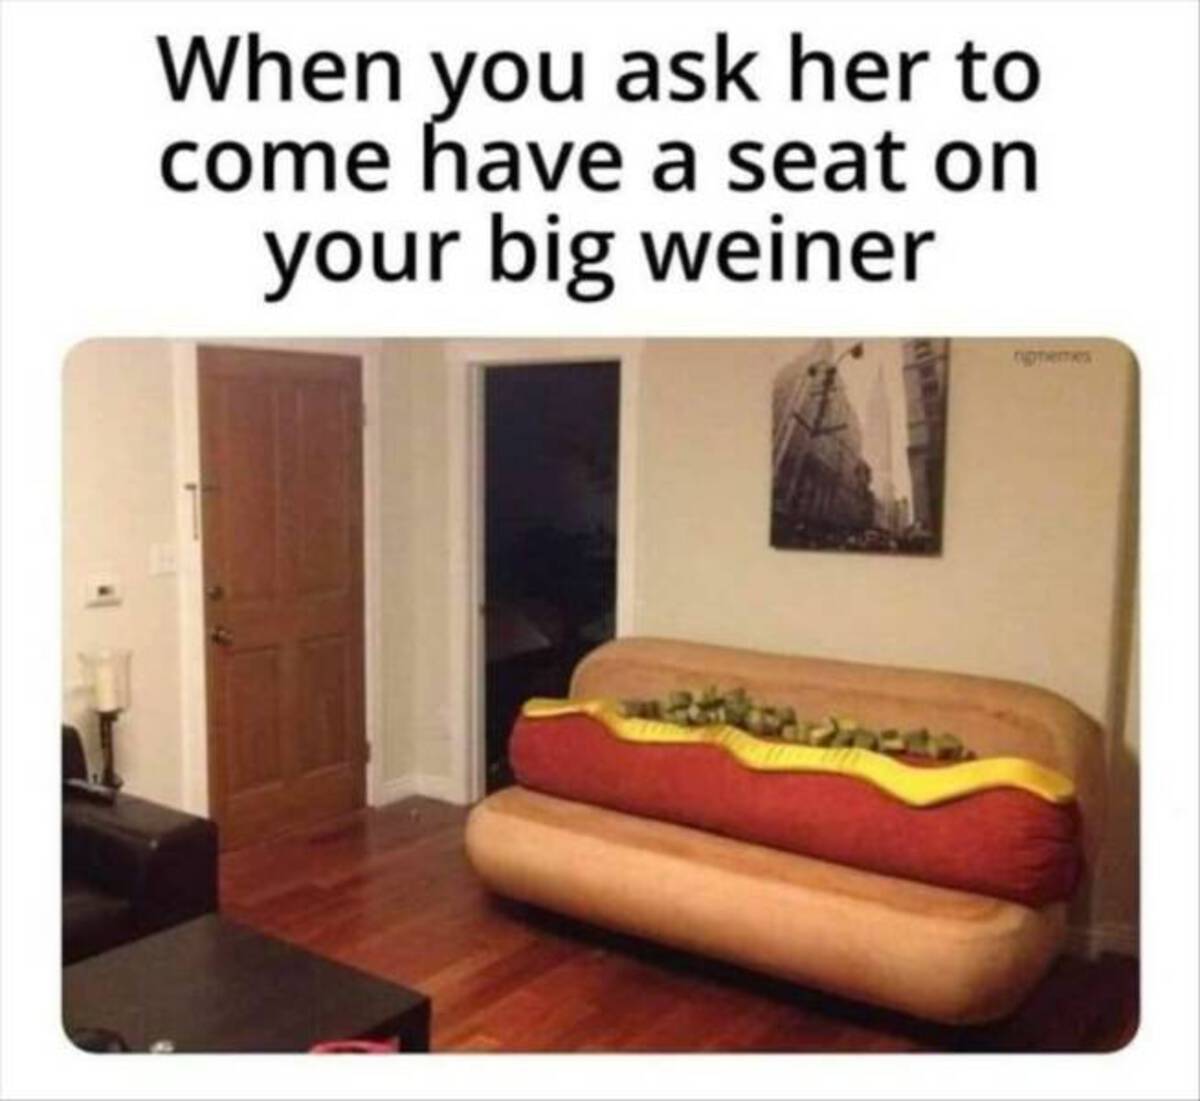 interior design - When you ask her to come have a seat on your big weiner